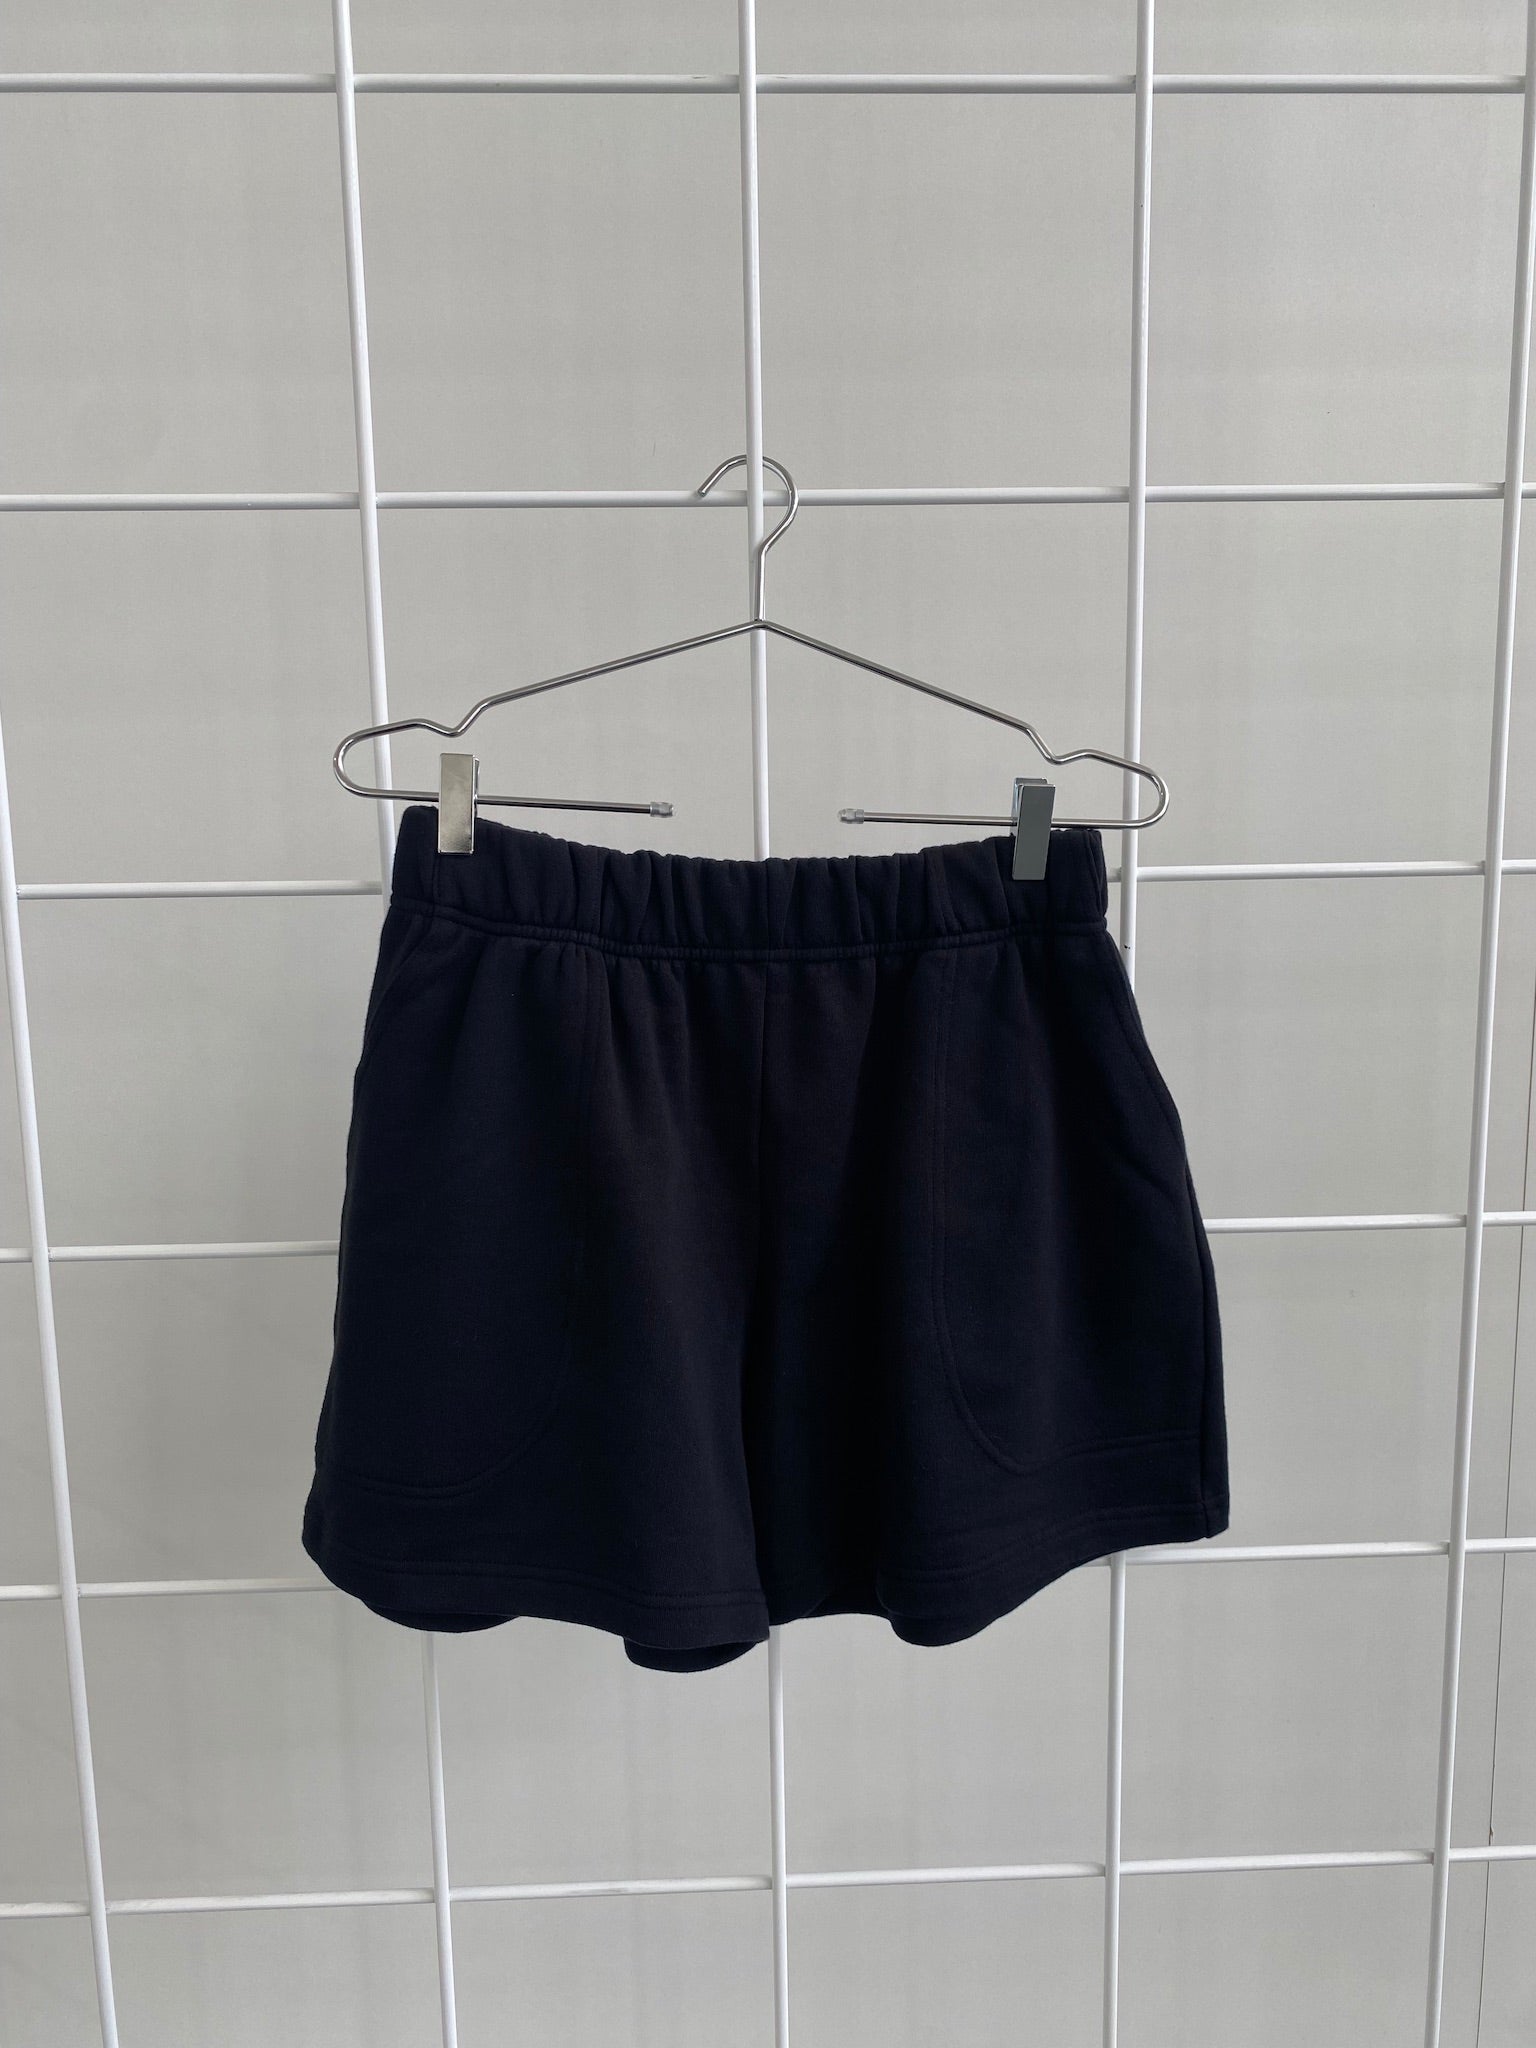 Perfectly Imperfect A.24 Black Organic Terry Shorts